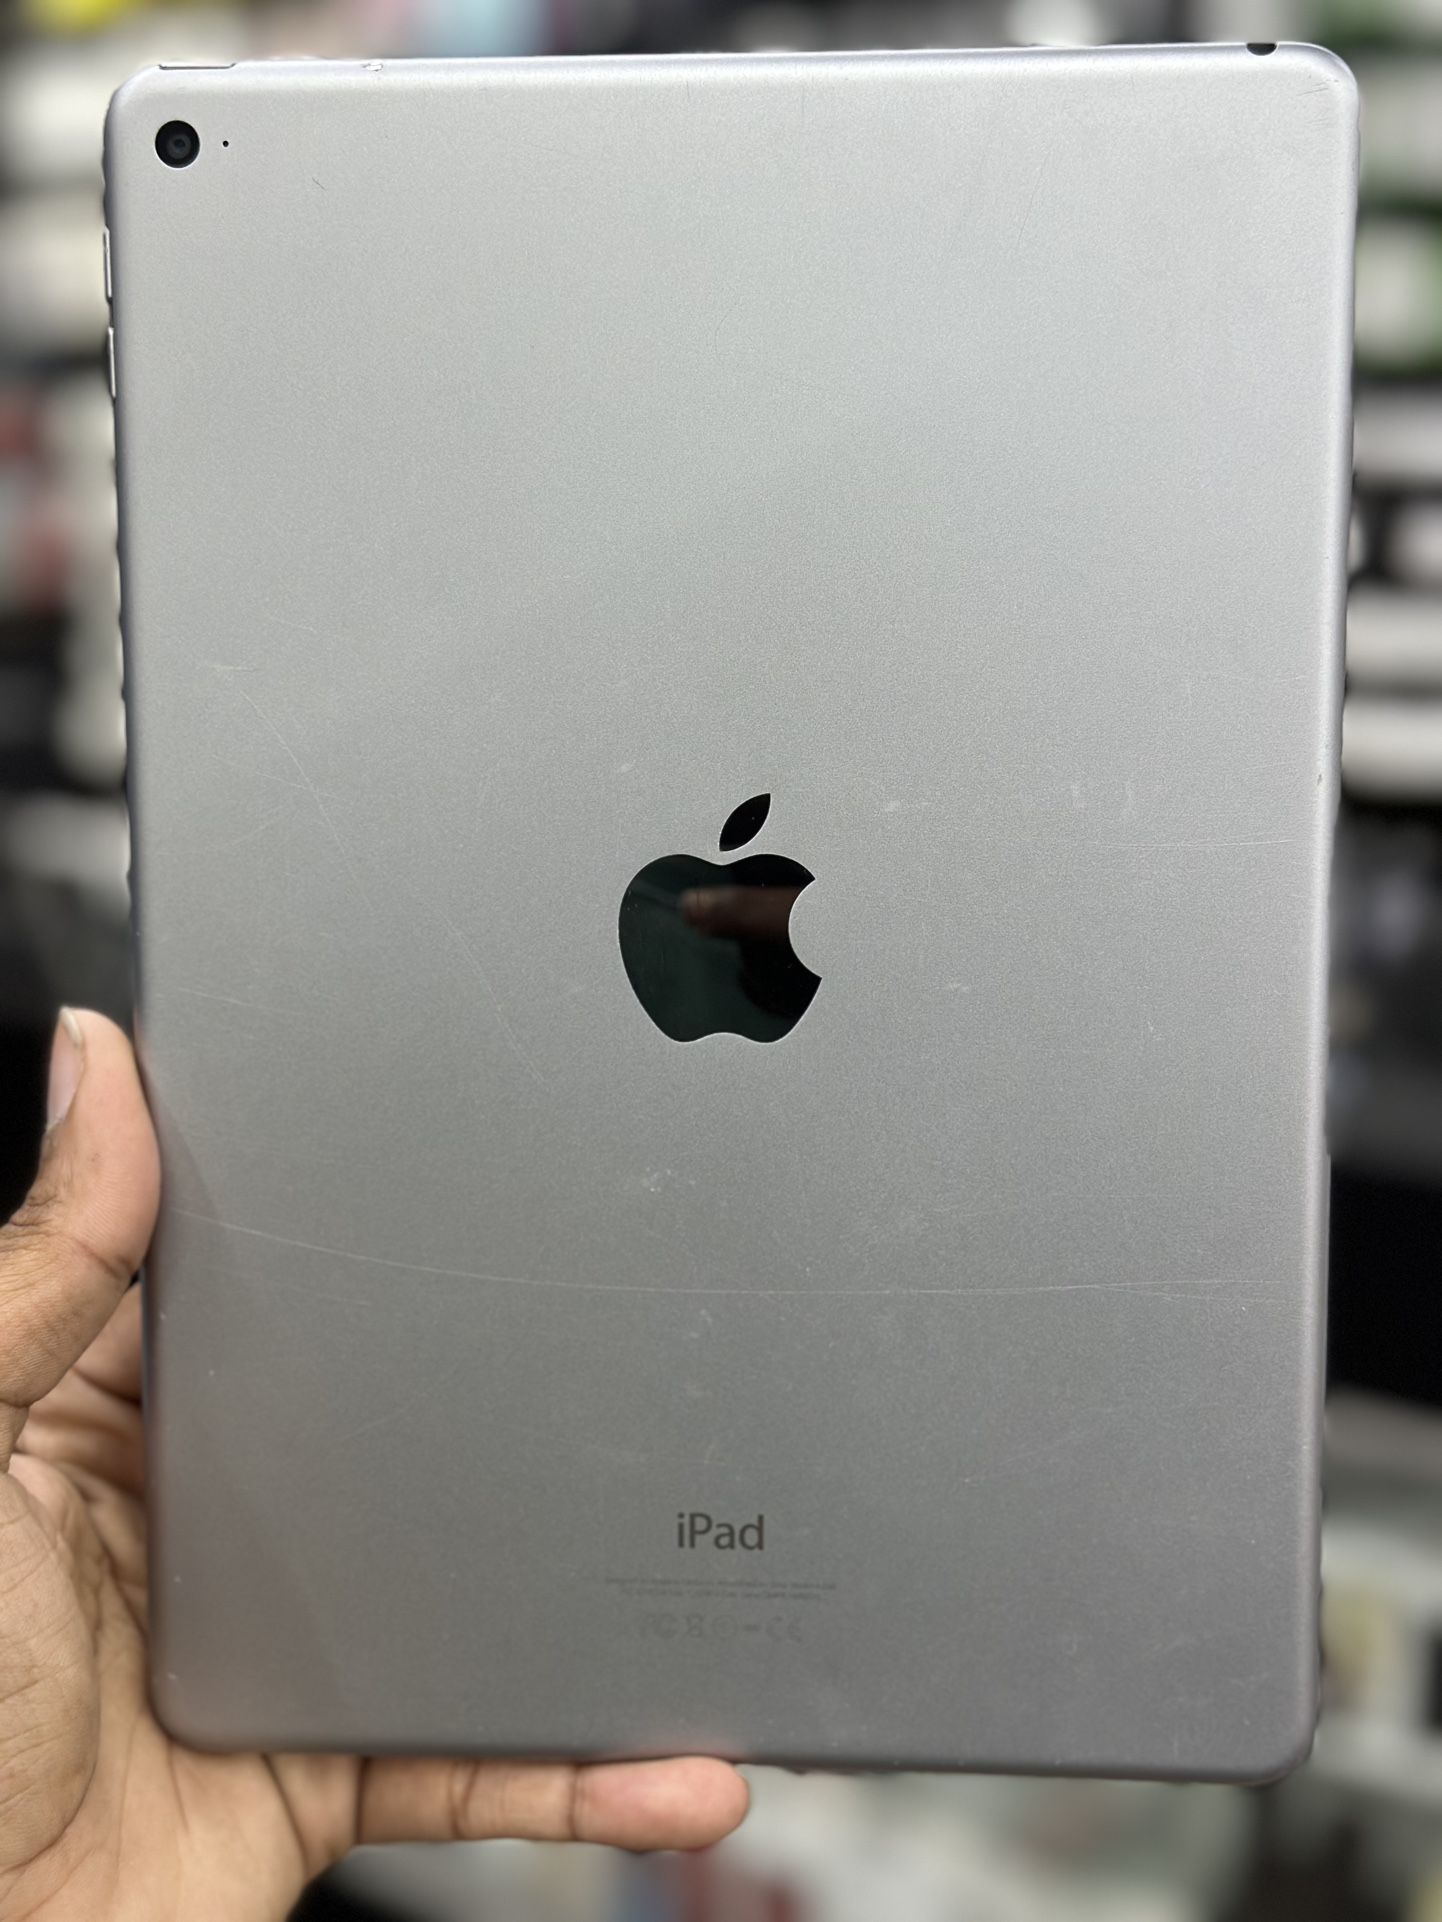 iPad Air 2 16gb-Multi Touch Display With LED Backlight